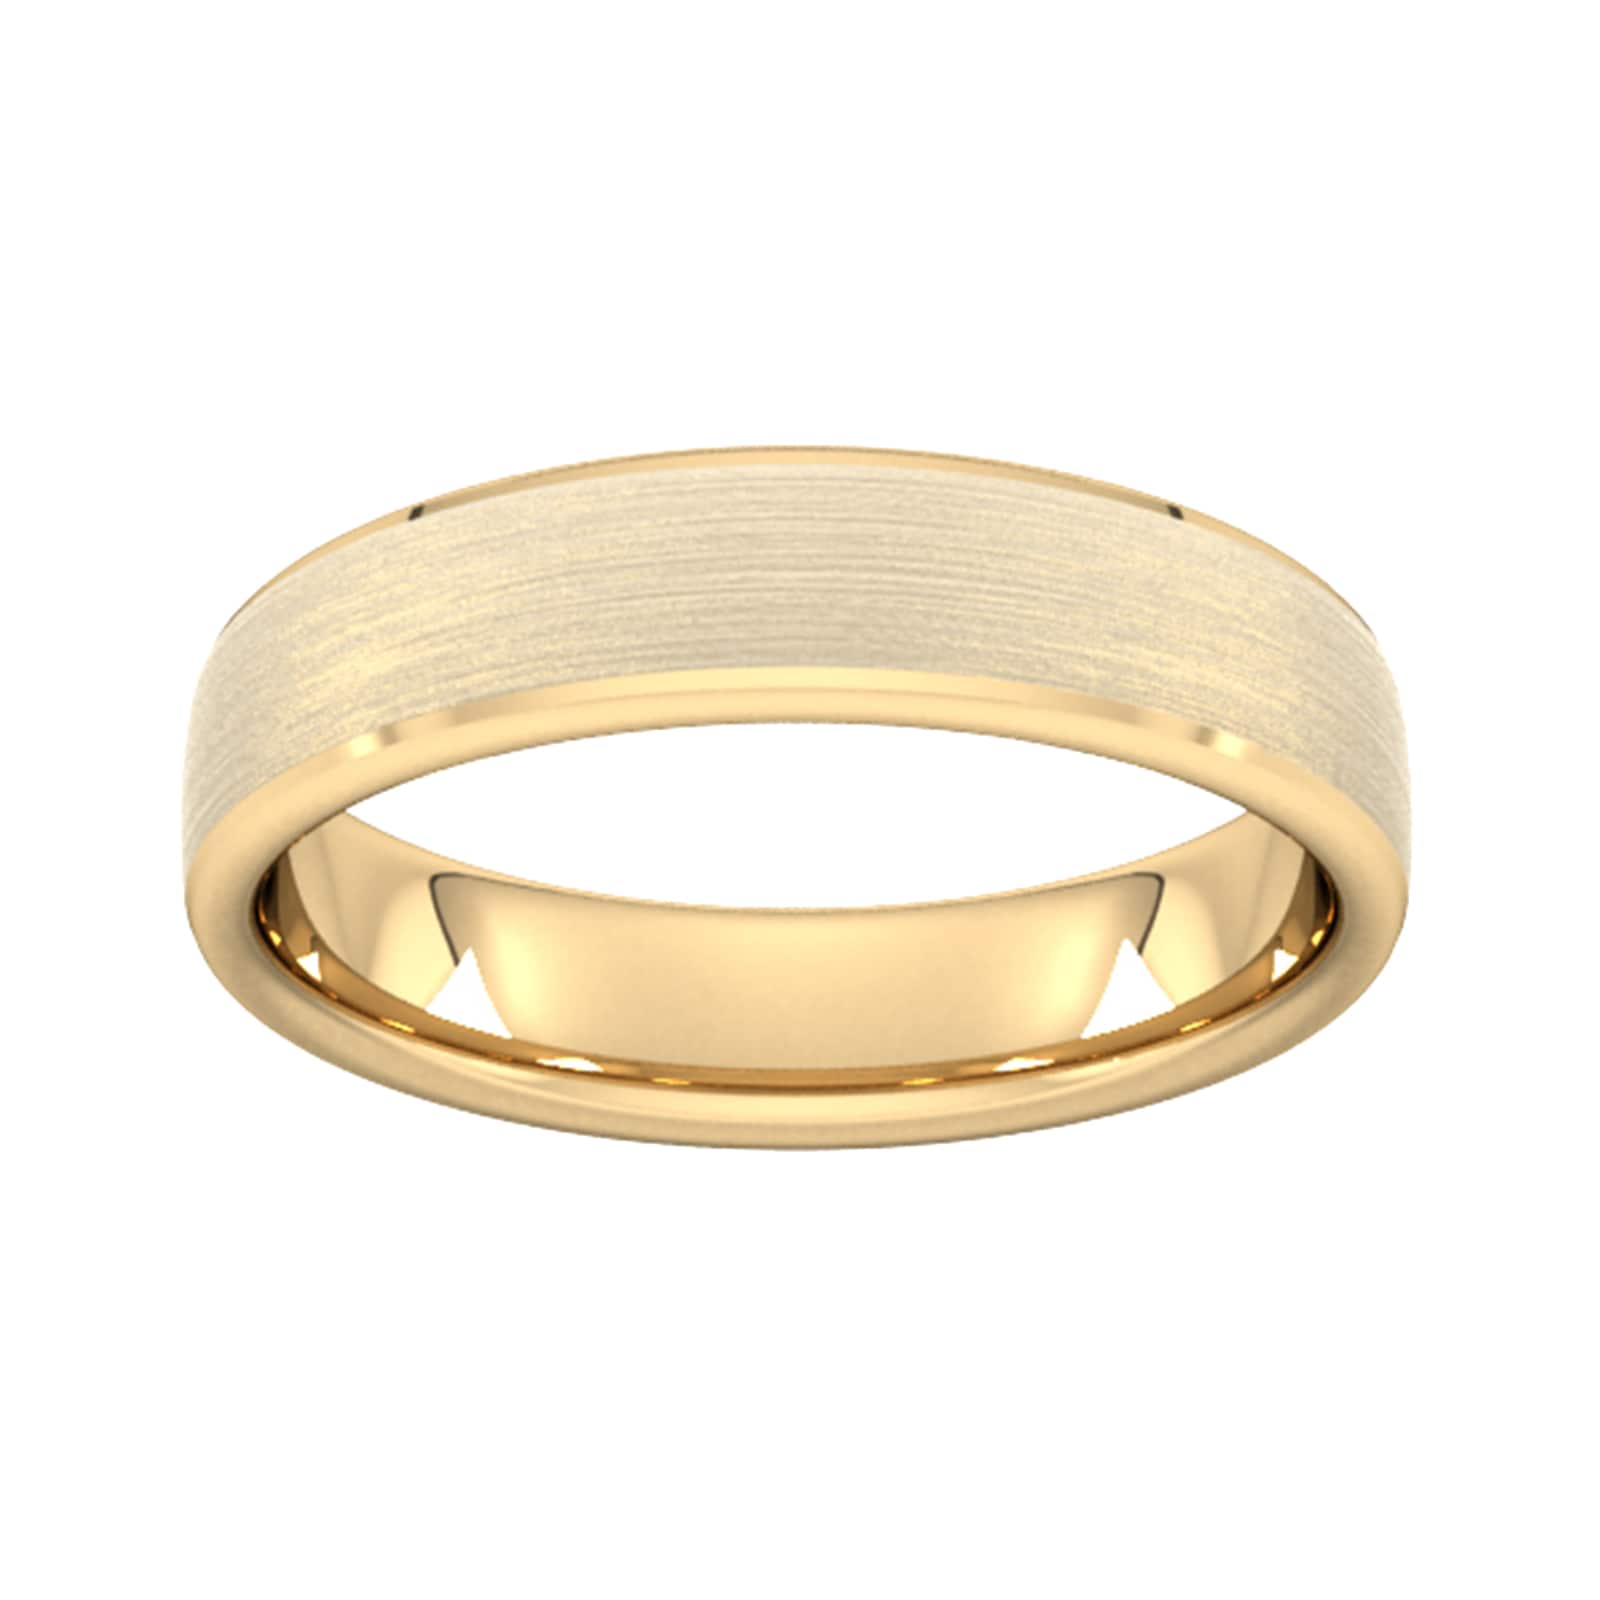 5mm Flat Court Heavy Polished Chamfered Edges With Matt Centre Wedding Ring In 18 Carat Yellow Gold - Ring Size Z